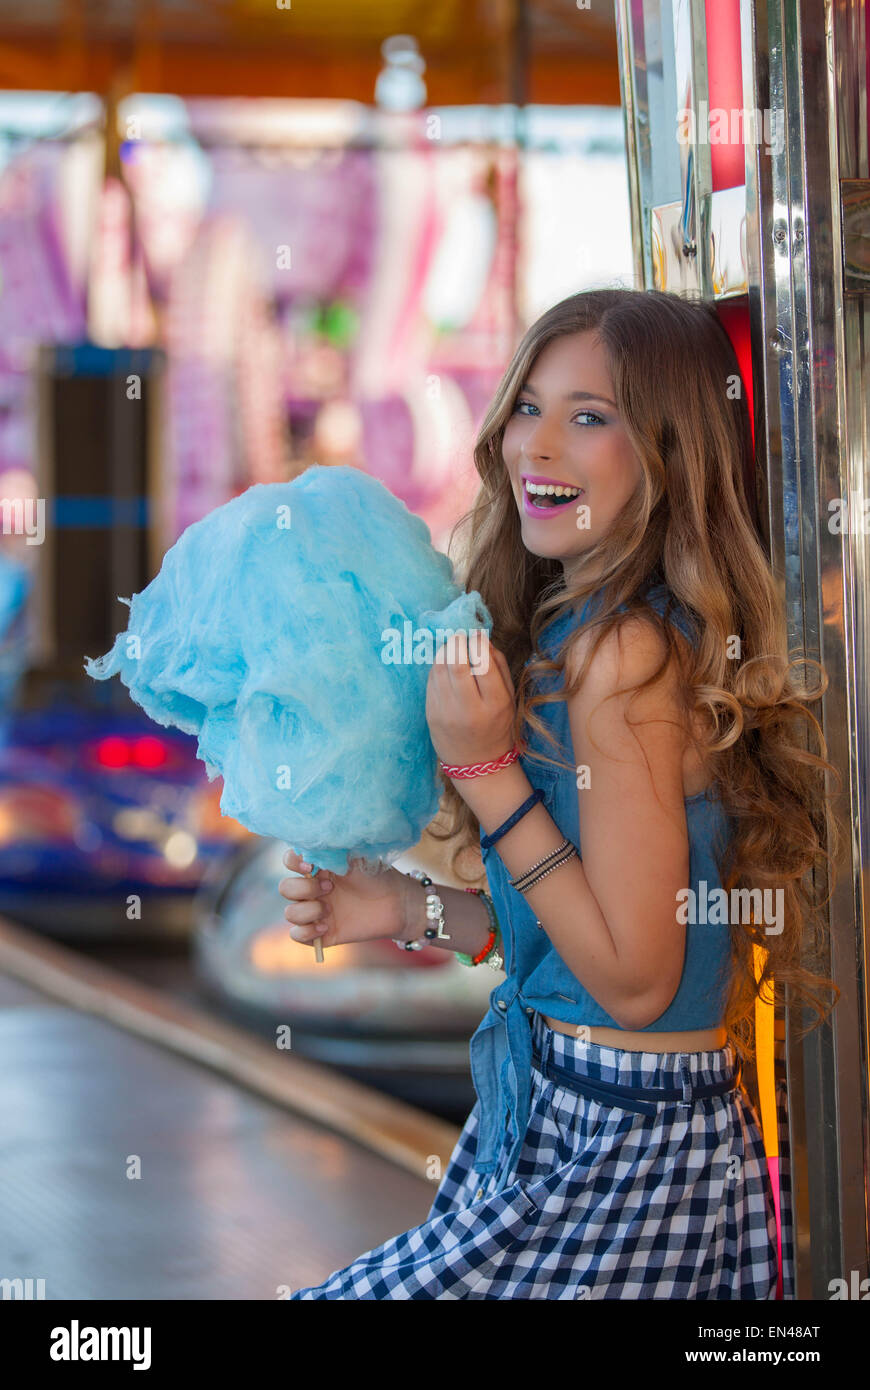 happy teen at fair eating candy floss or cotton. Stock Photo